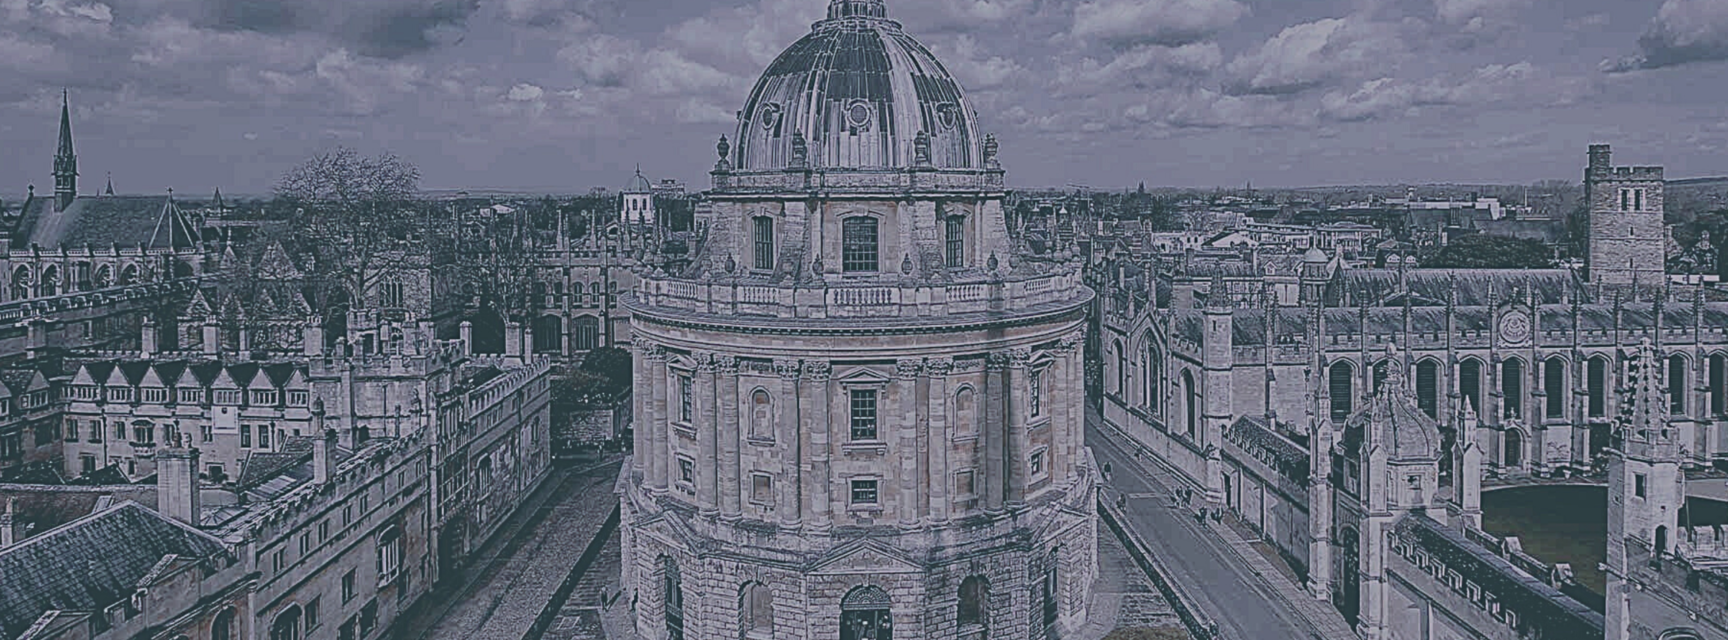 Page banner image showing Oxford's Radcliffe Camera.